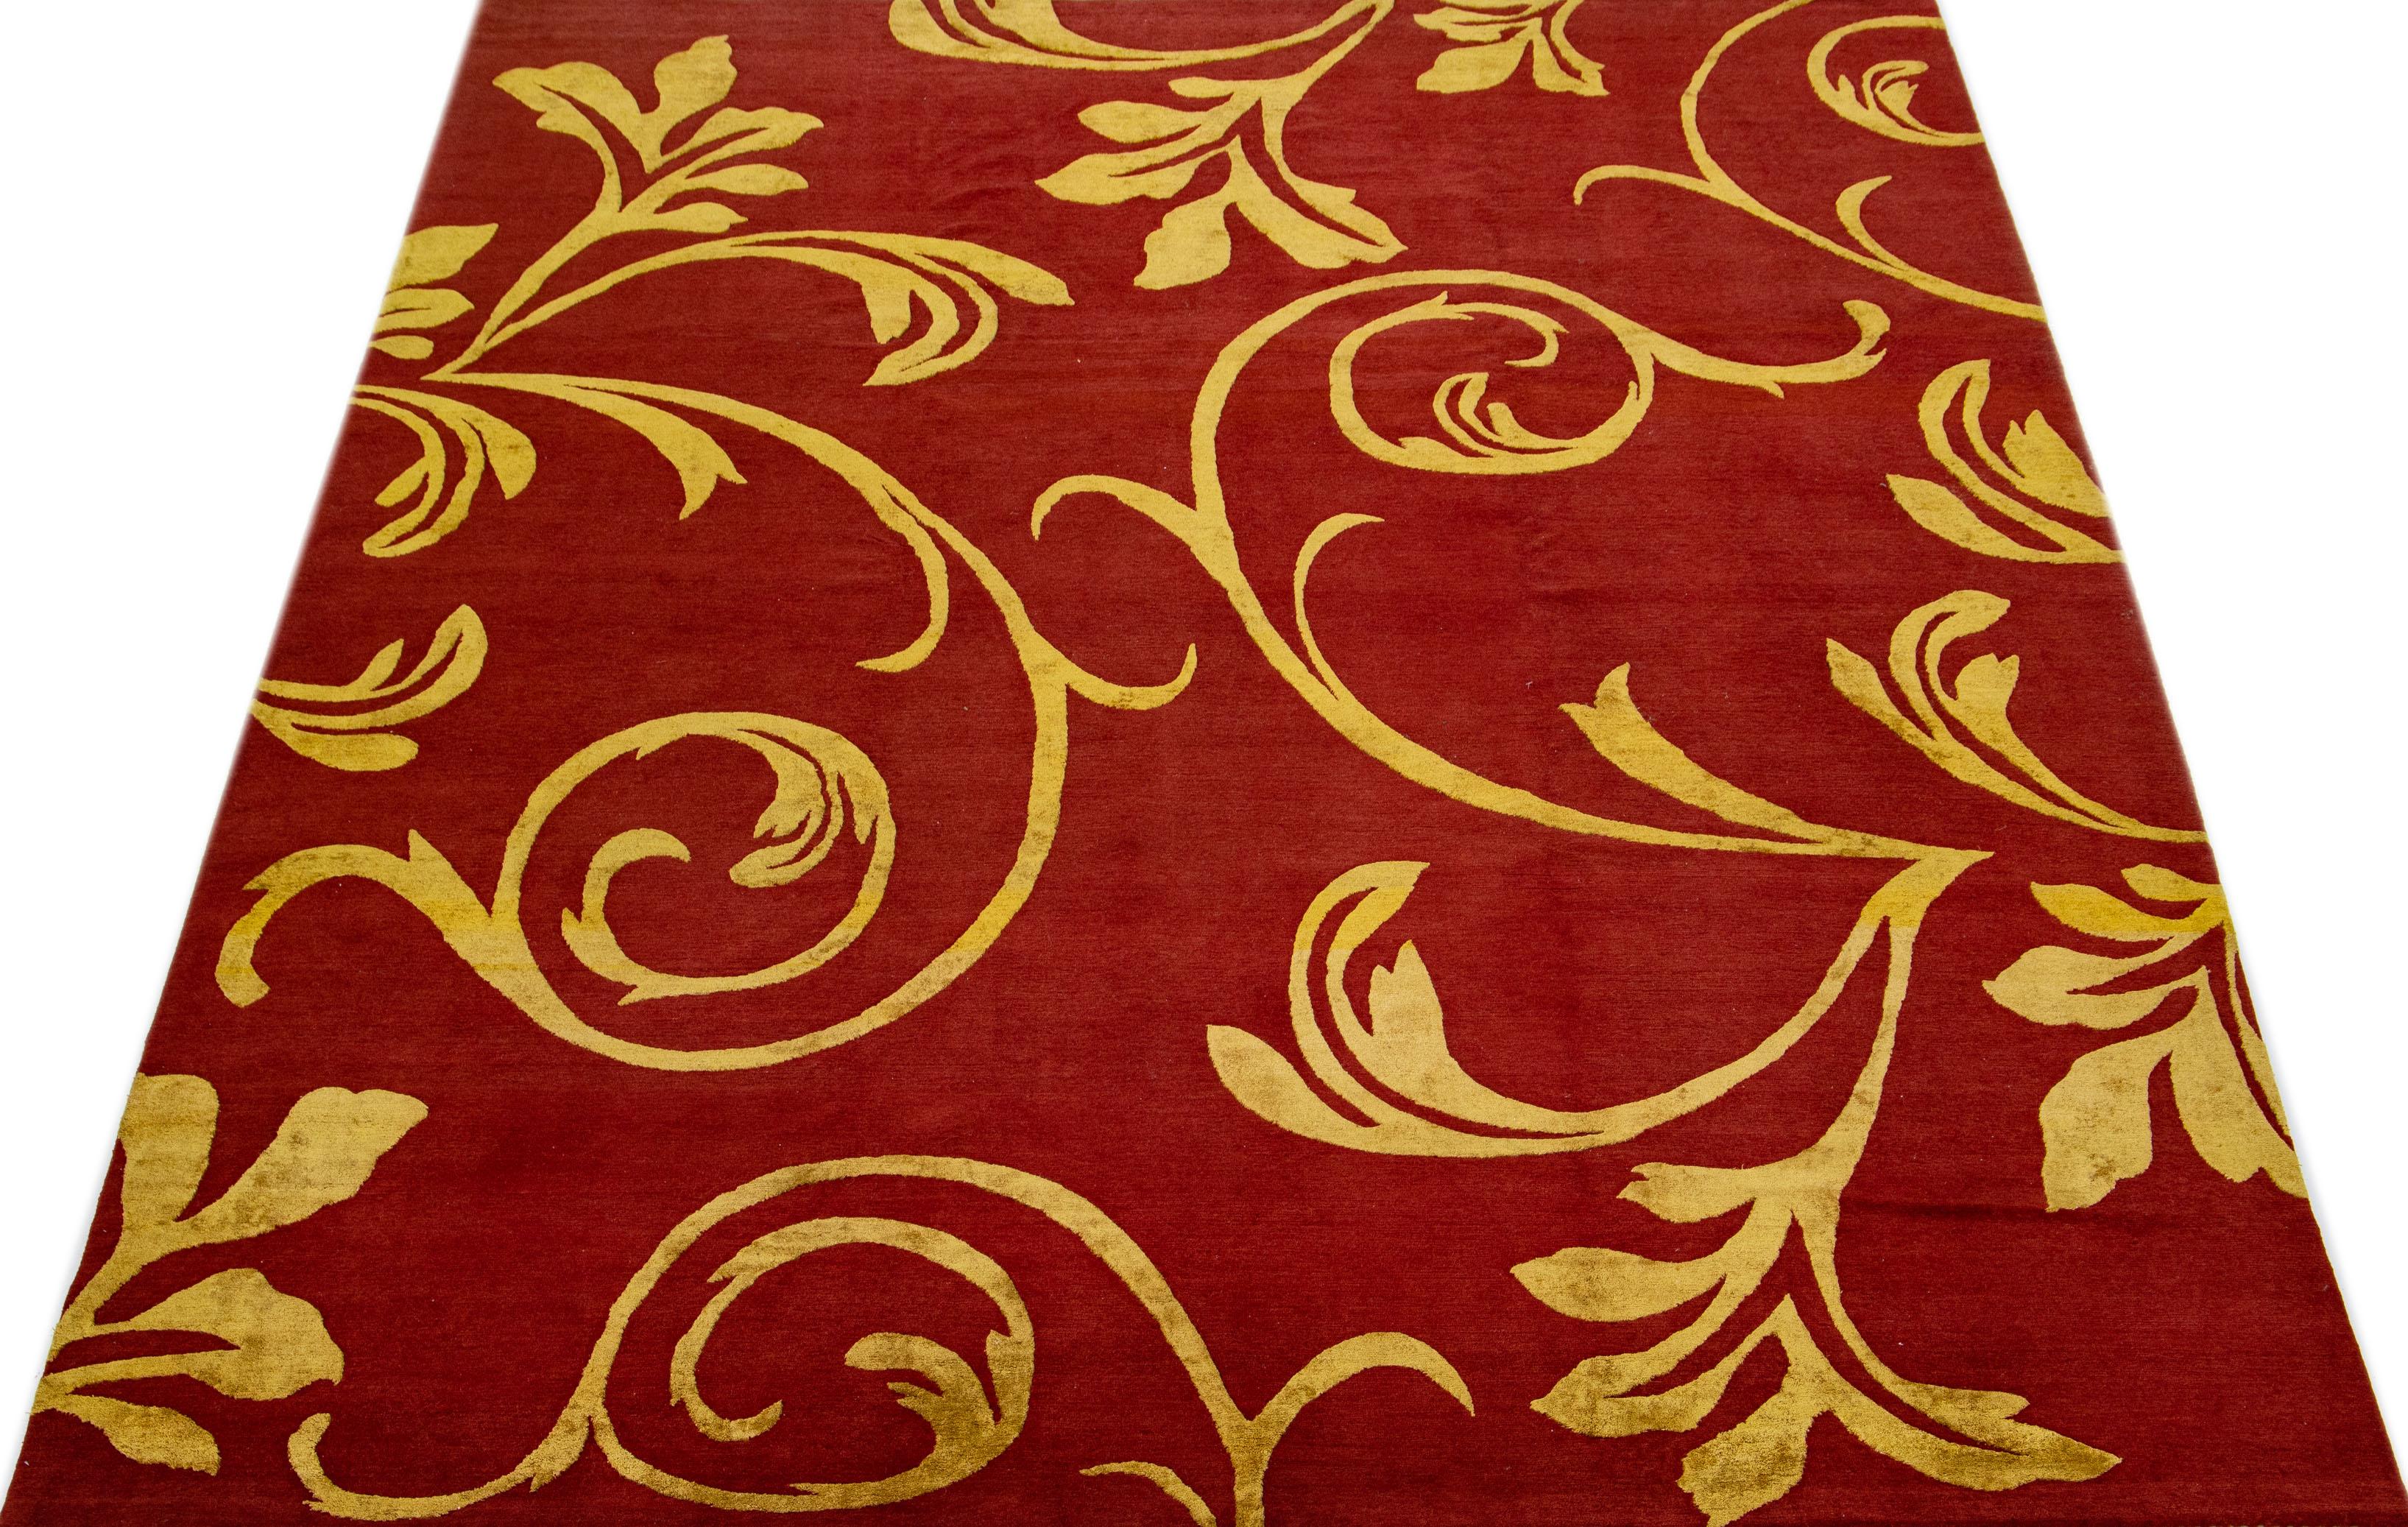 This exquisite Nepalese hand knotted wool rug boasts a captivating red color scheme and fine golden accents that complement its elegant all-over scroll design.

This rug measures 9' x 12'.